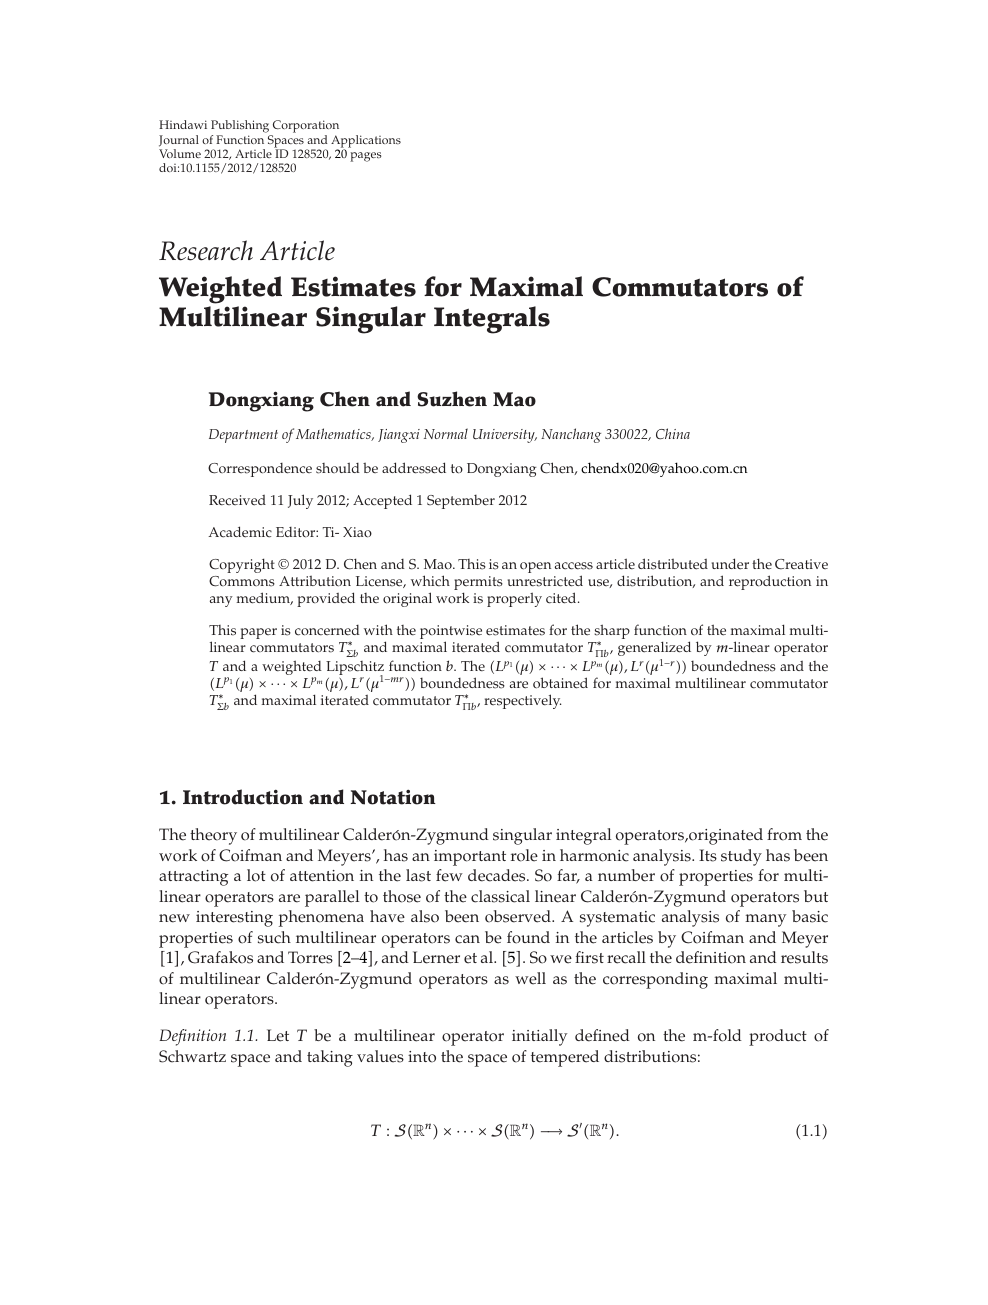 Weighted Estimates For Maximal Commutators Of Multilinear Singular Integrals Topic Of Research Paper In Mathematics Download Scholarly Article Pdf And Read For Free On Cyberleninka Open Science Hub